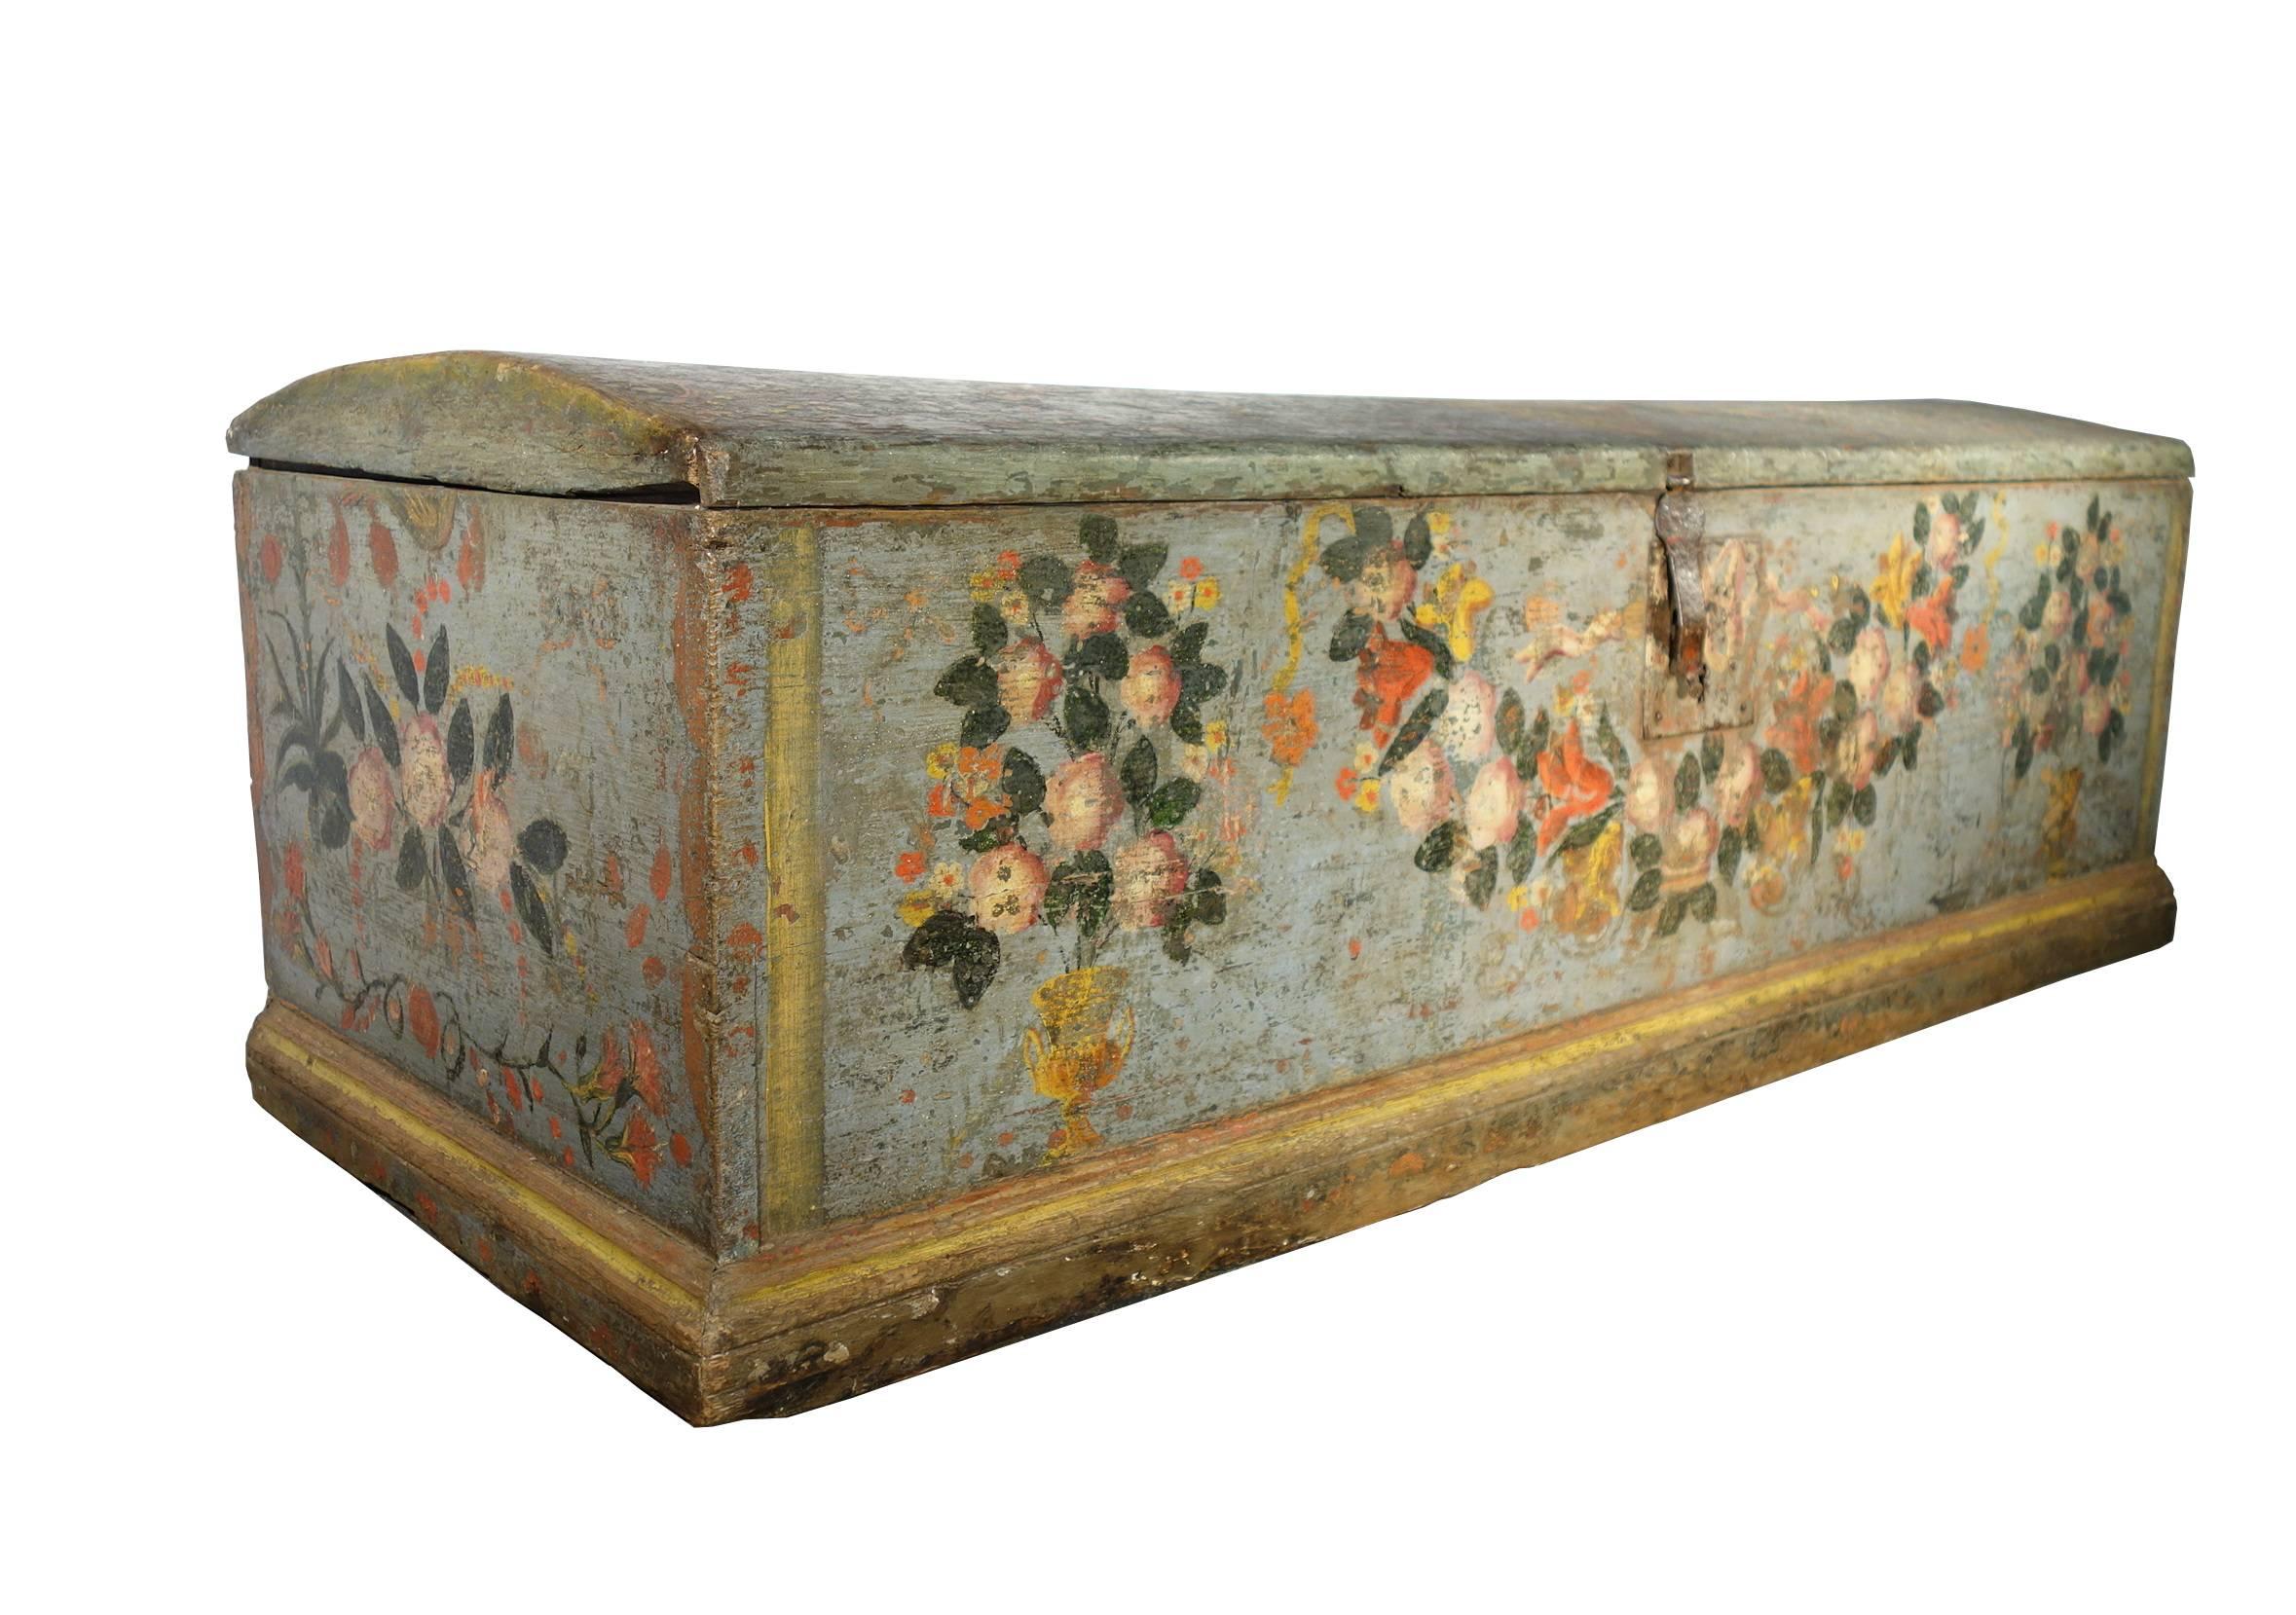 Wonderful, authentic, early 18th century Sicilian nuptial dowery trunk. hand-painted in soft aqua blue, green, red, rose, pink, orange and yellow with flower vases, draping leaf garlands, ribbon, red lilies, white roses. On the rounded lid top the